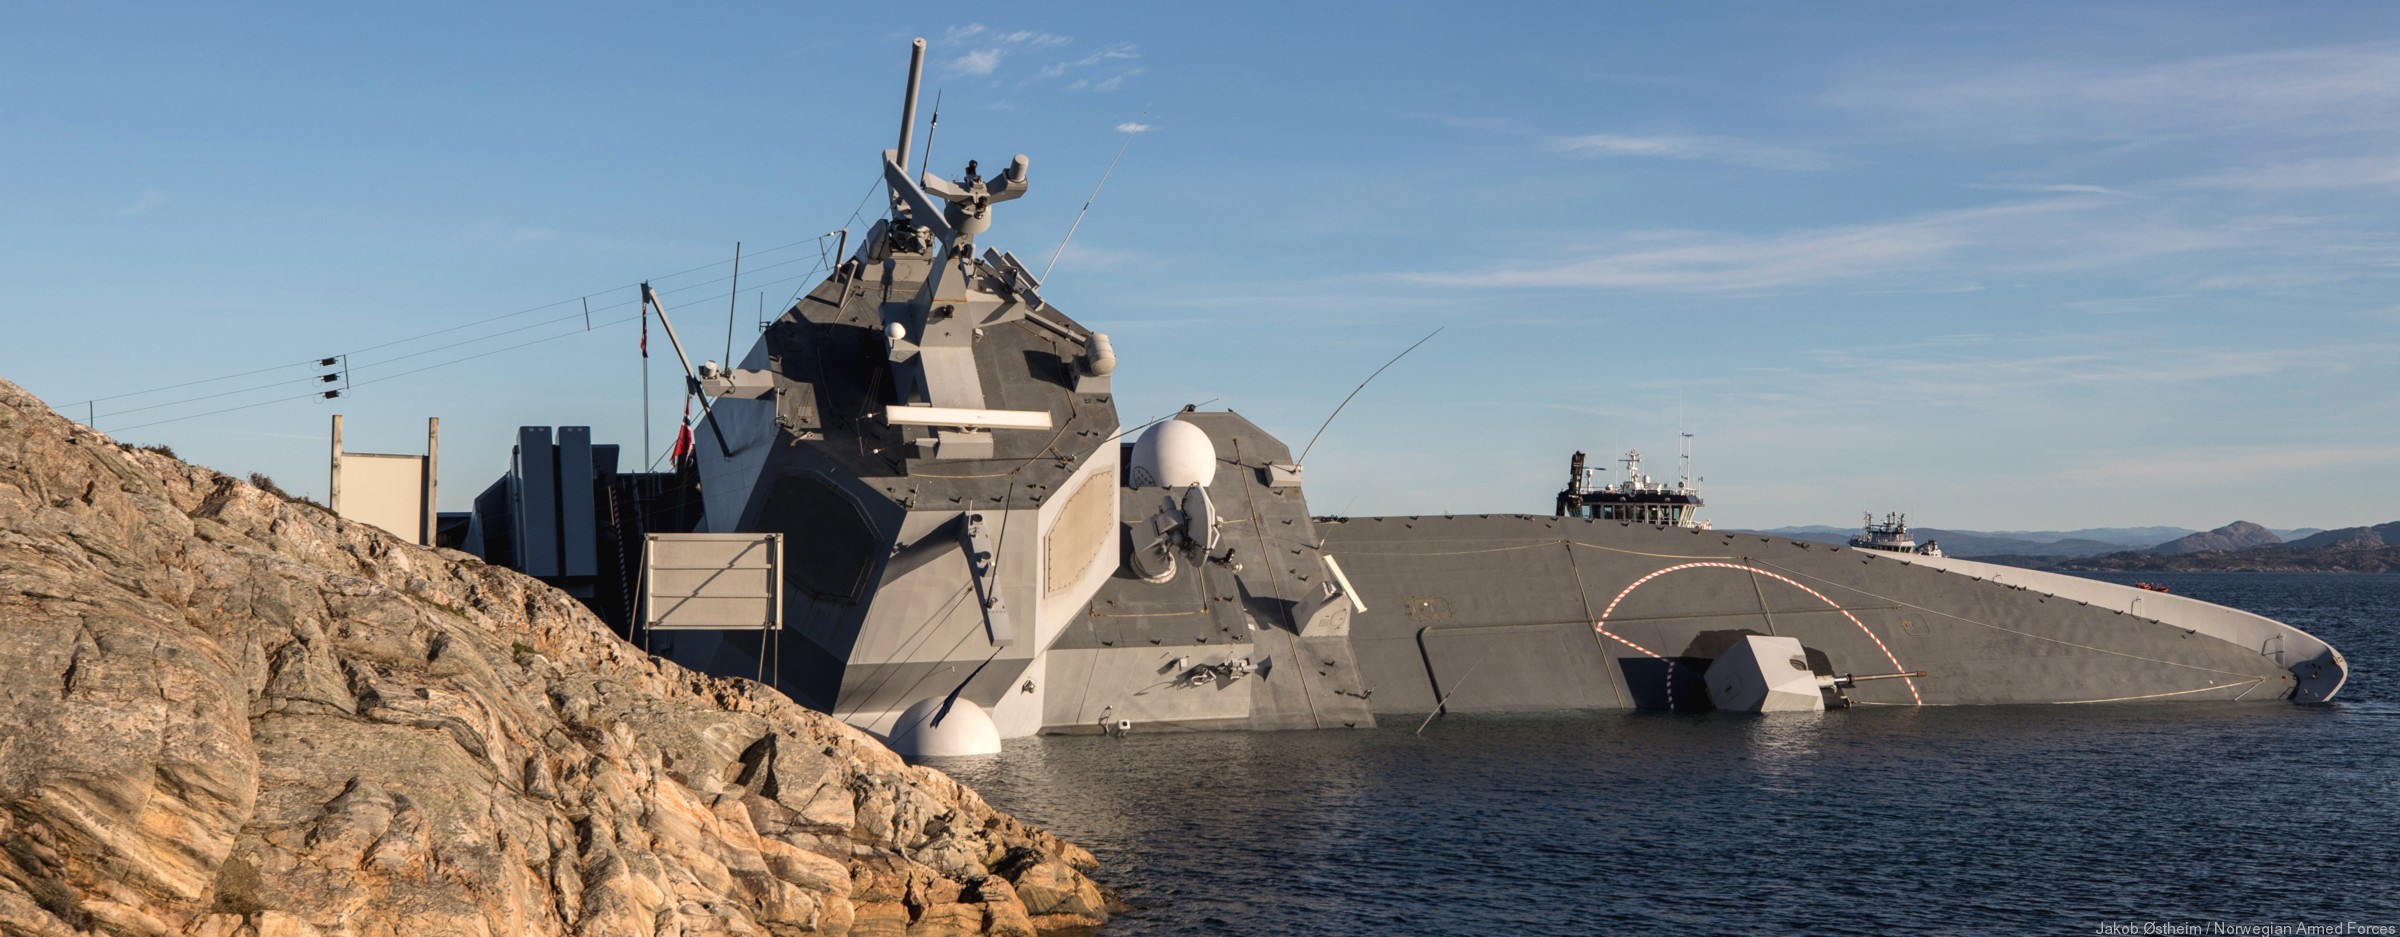 f-313 helge ingstad hnoms knm nansen class frigate royal norwegian navy 06 collision nato exercise trident juncture